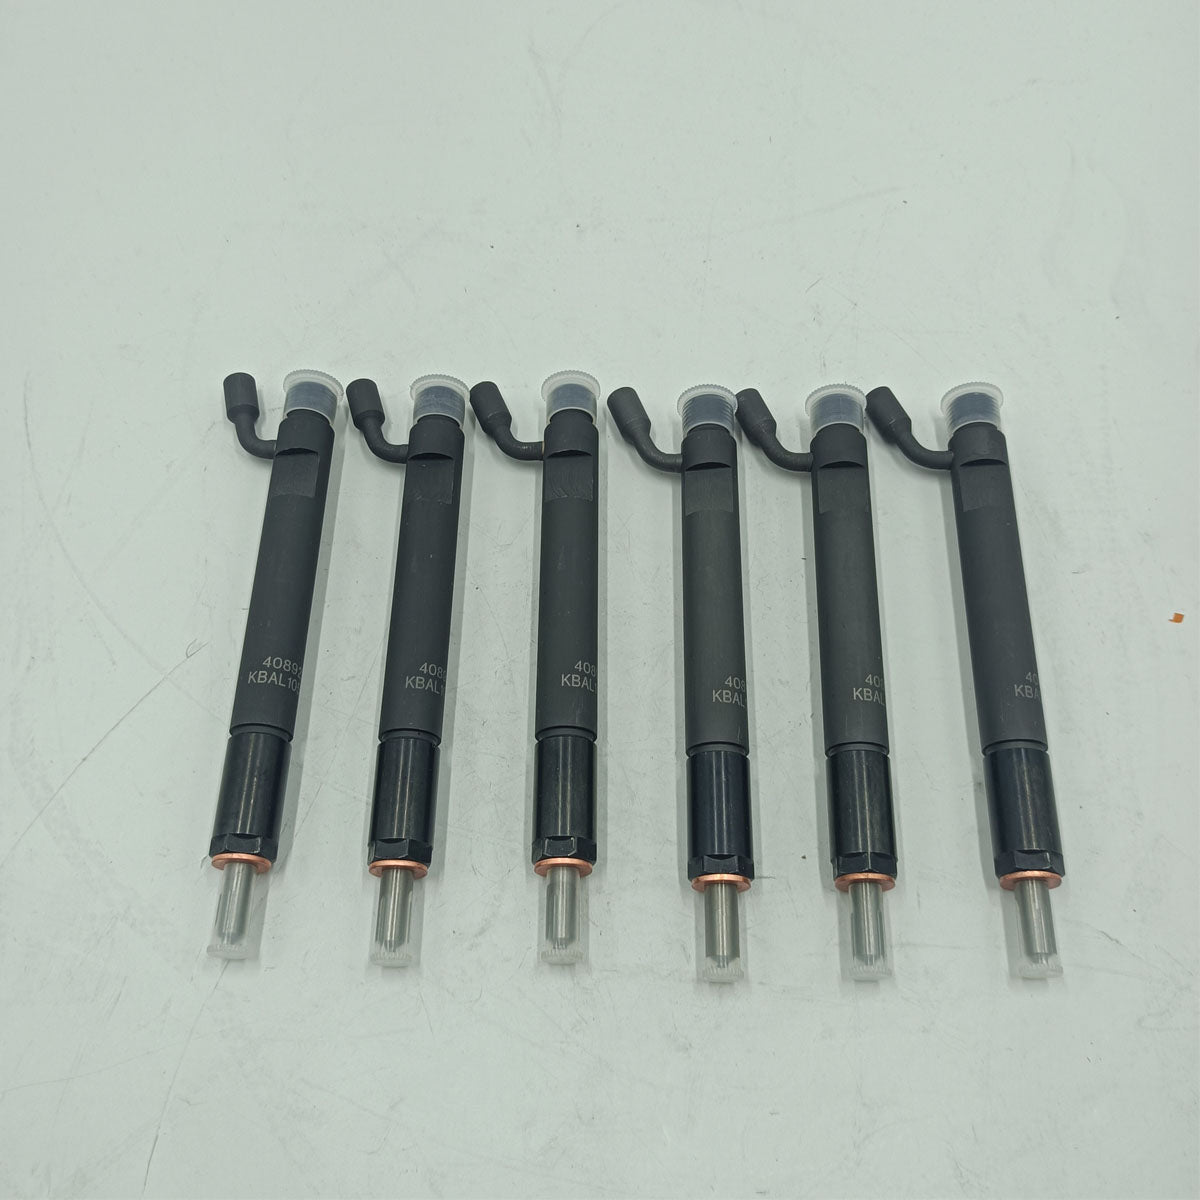 6pcs Fuel Pump Injector 4089277 for Cummins 6CT 8.3 Engine Machinery